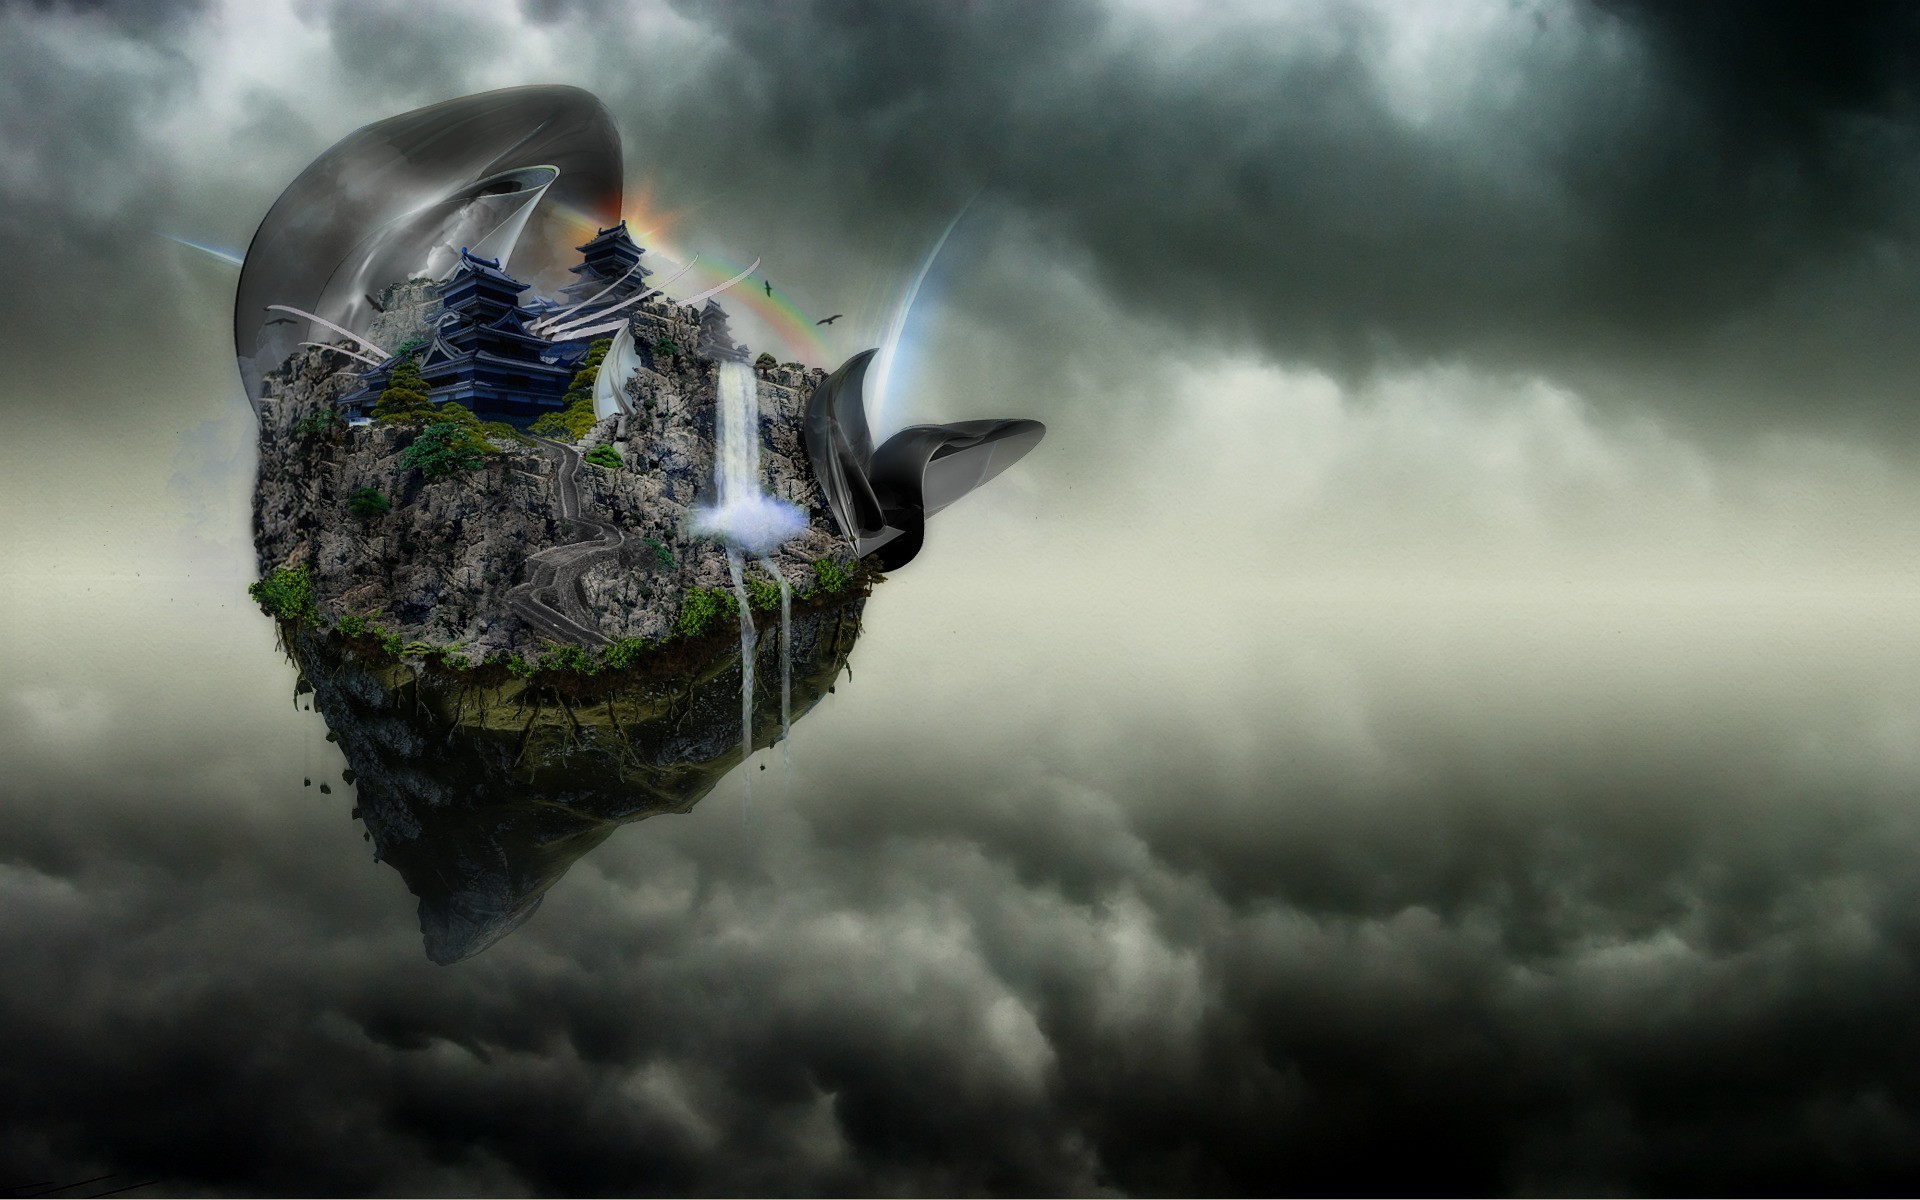 fantasy Art, Artwork, Digital Art, Floating Island, Clouds, Nature, Chinese Architecture, Rock, Roots, Trees, Waterfall, Rainbows, Birds Wallpaper